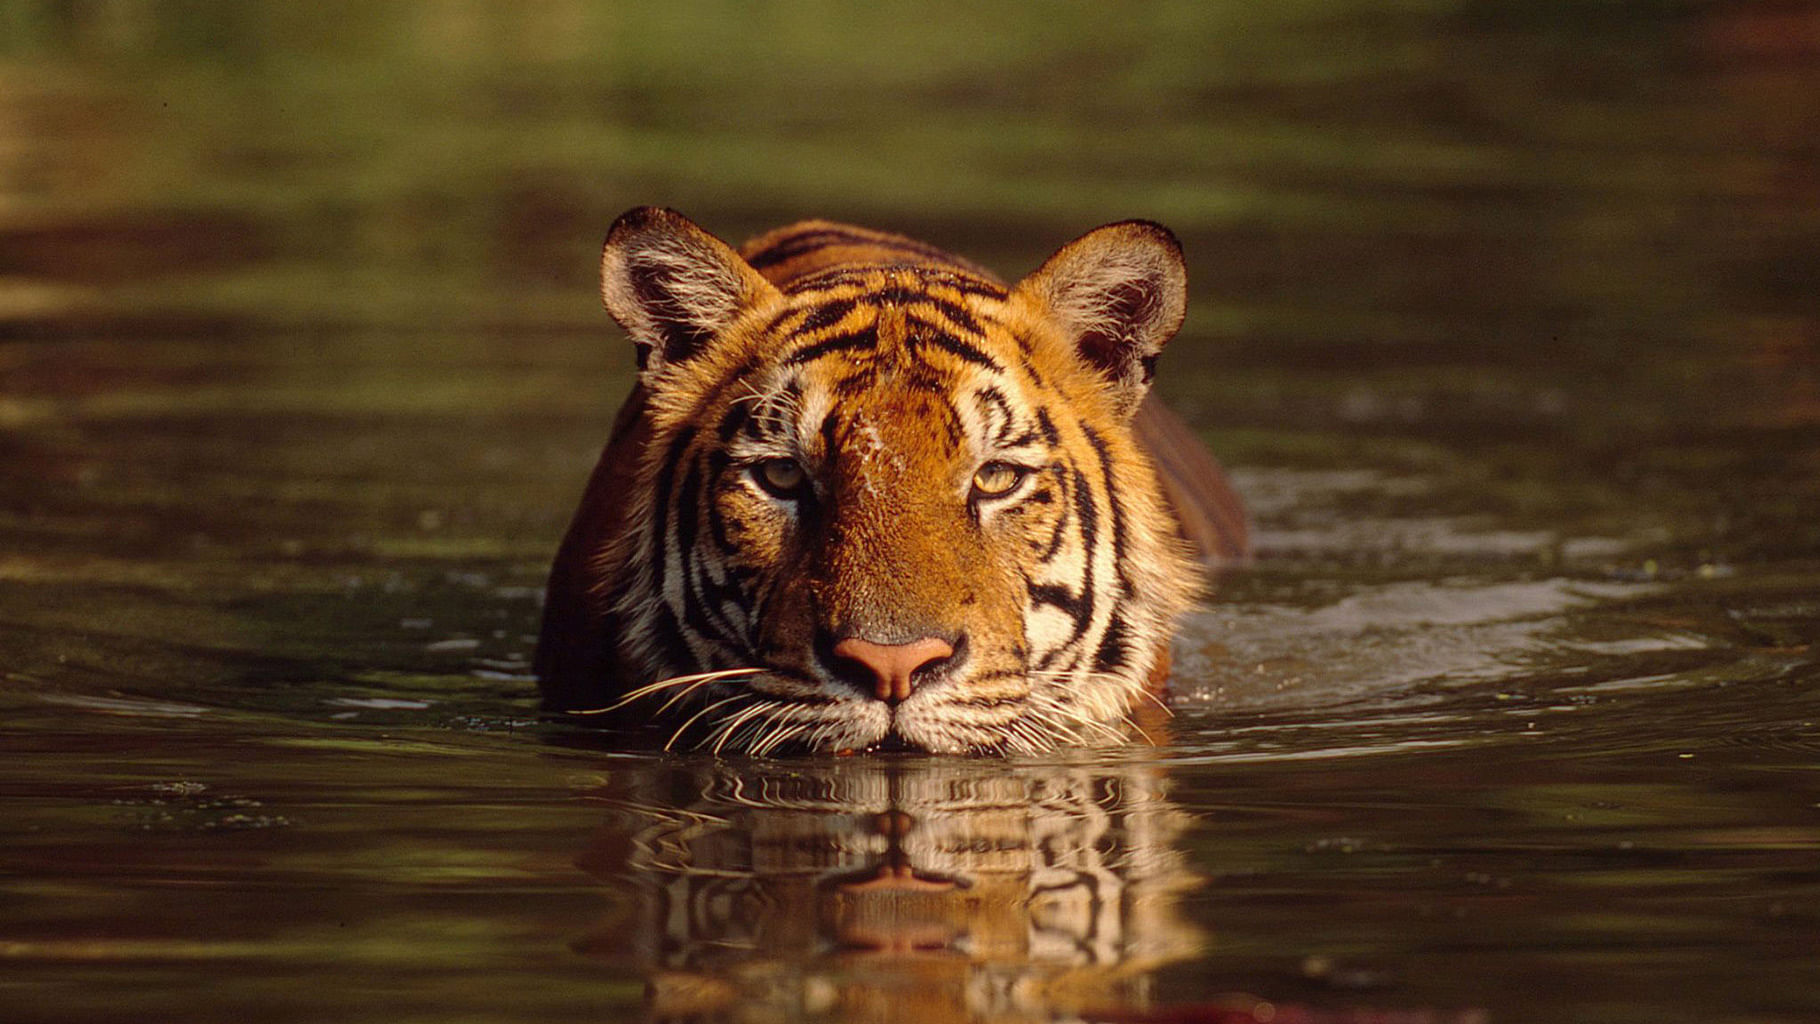 India alone holds more than half of the world’s tigers. (Photo: iStockphoto)